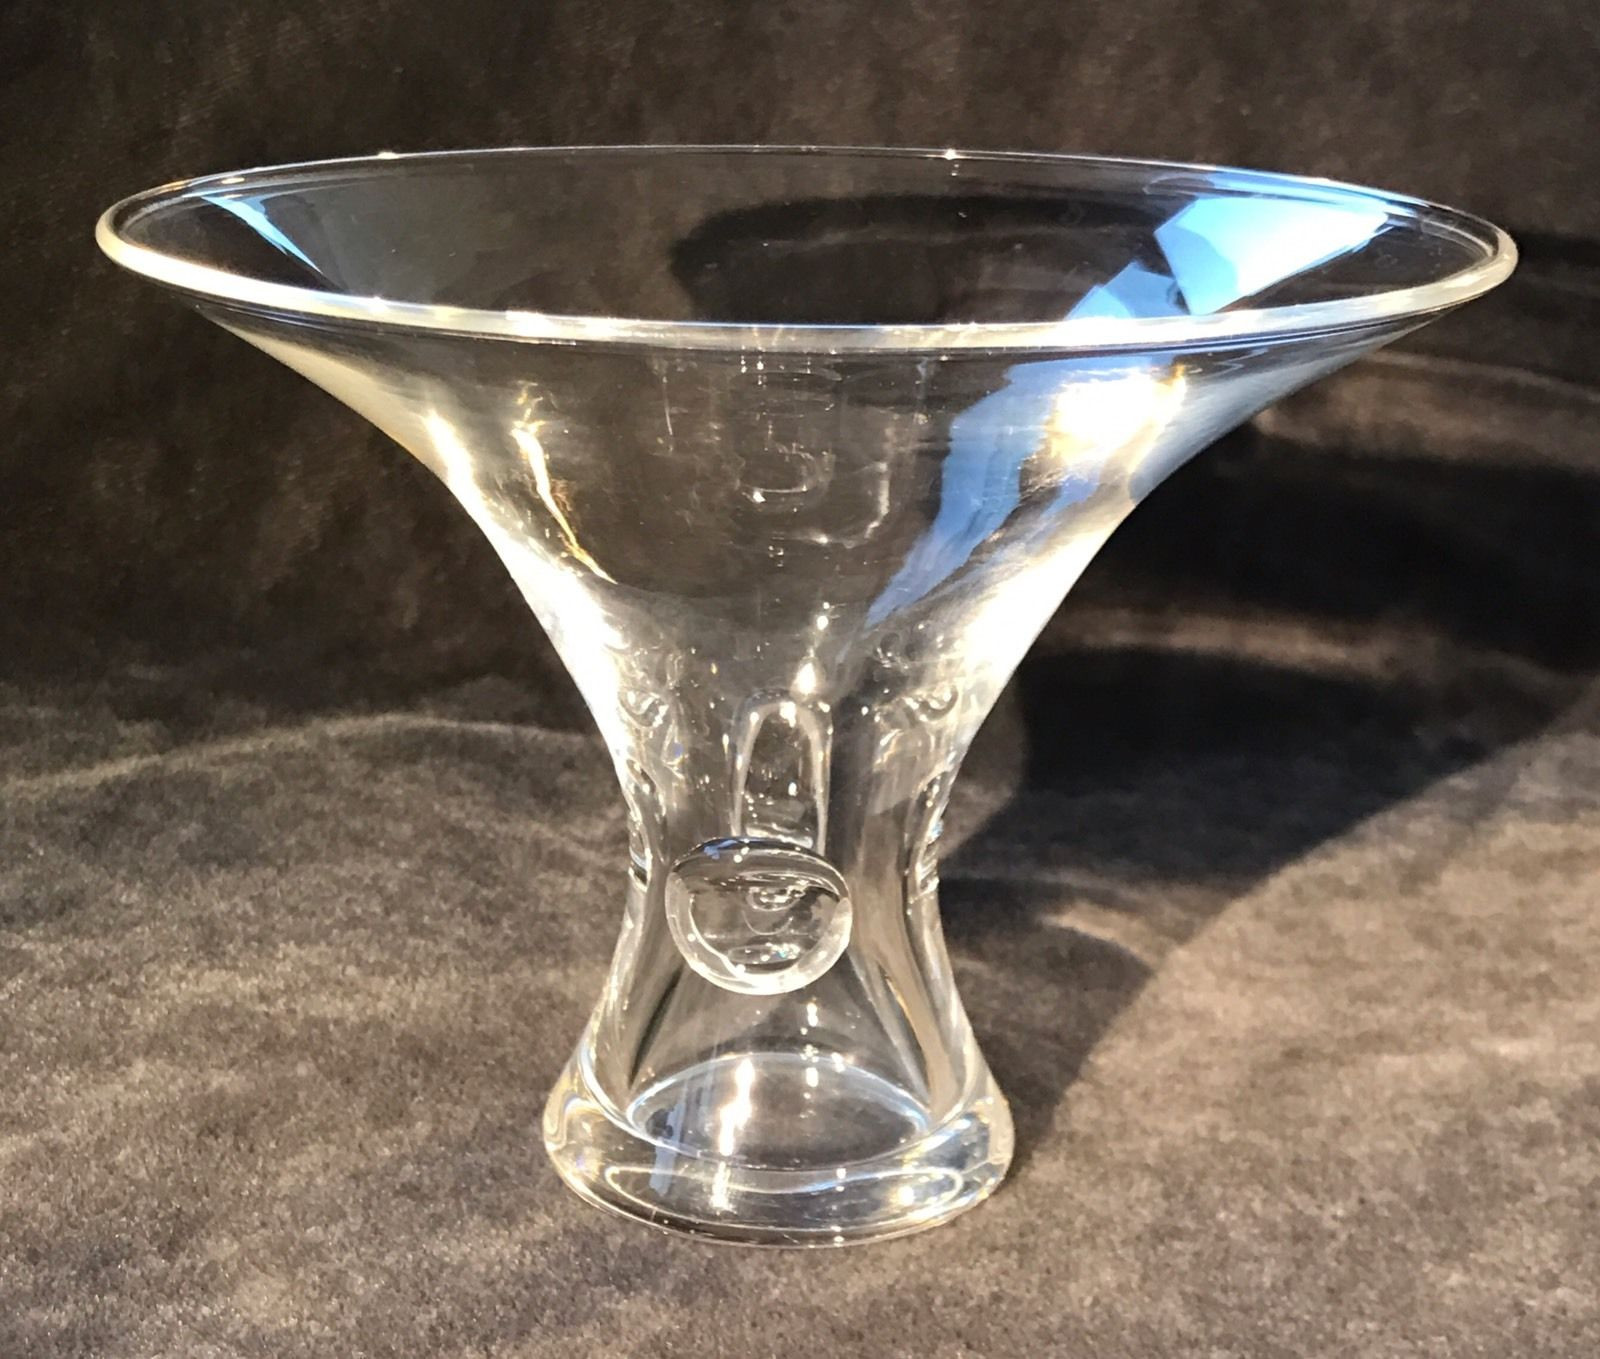 15 Stunning Steuben Vase Value 2024 free download steuben vase value of steuben glass flared vase pinched sides 150 00 picclick pertaining to steuben glass flared vase pinched sides 1 of 5